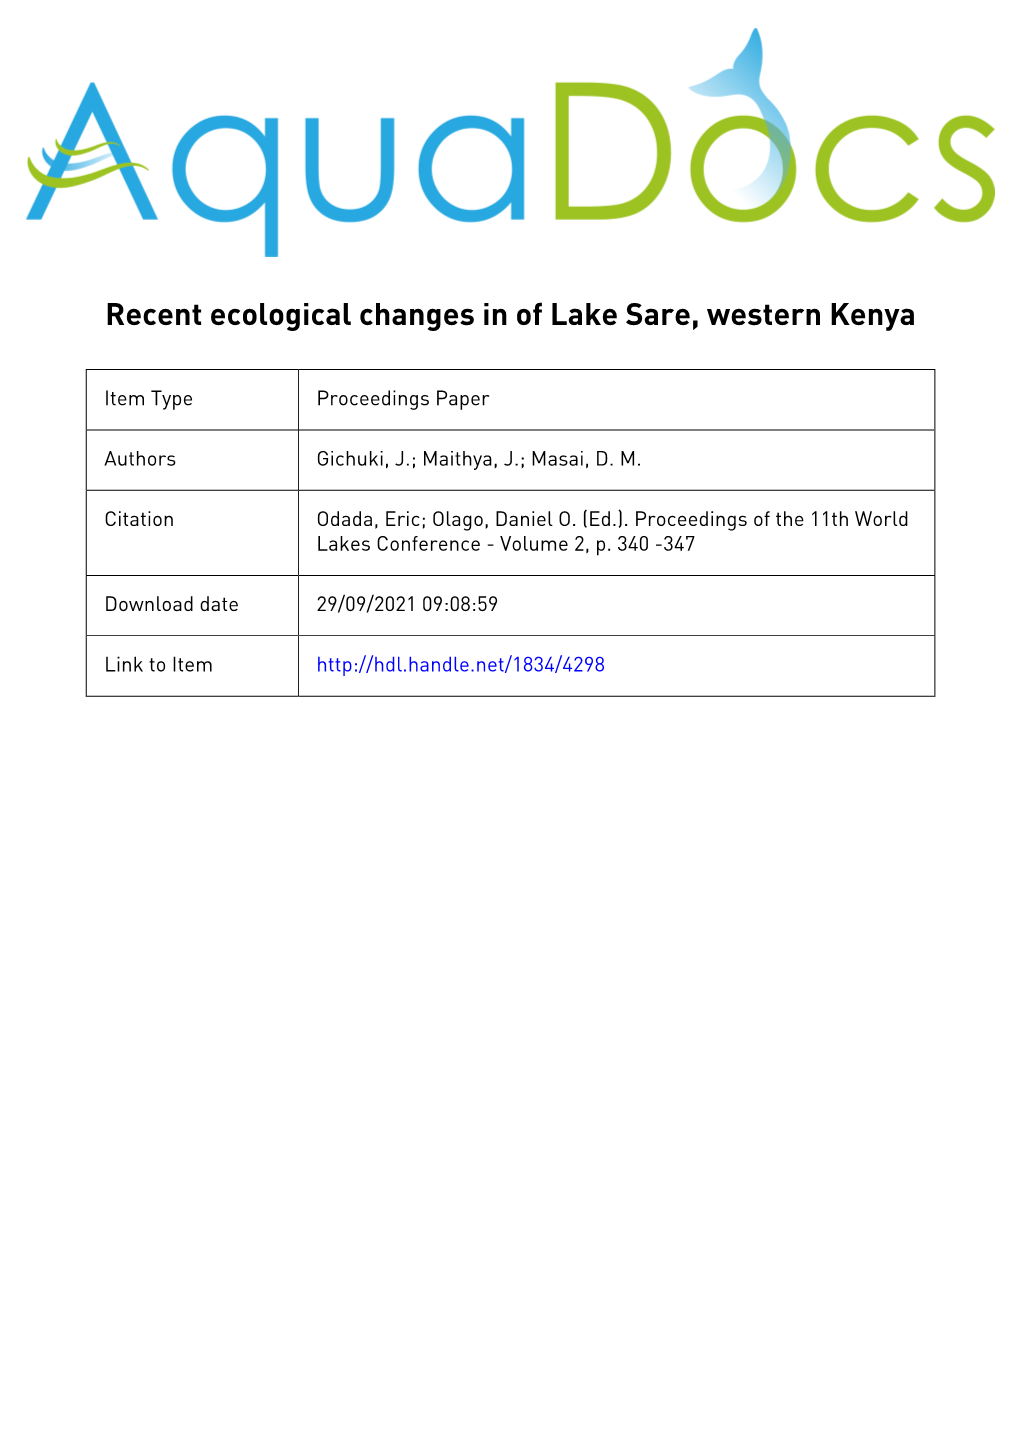 Recent Ecological Changes in of Lake Sare, Western Kenya